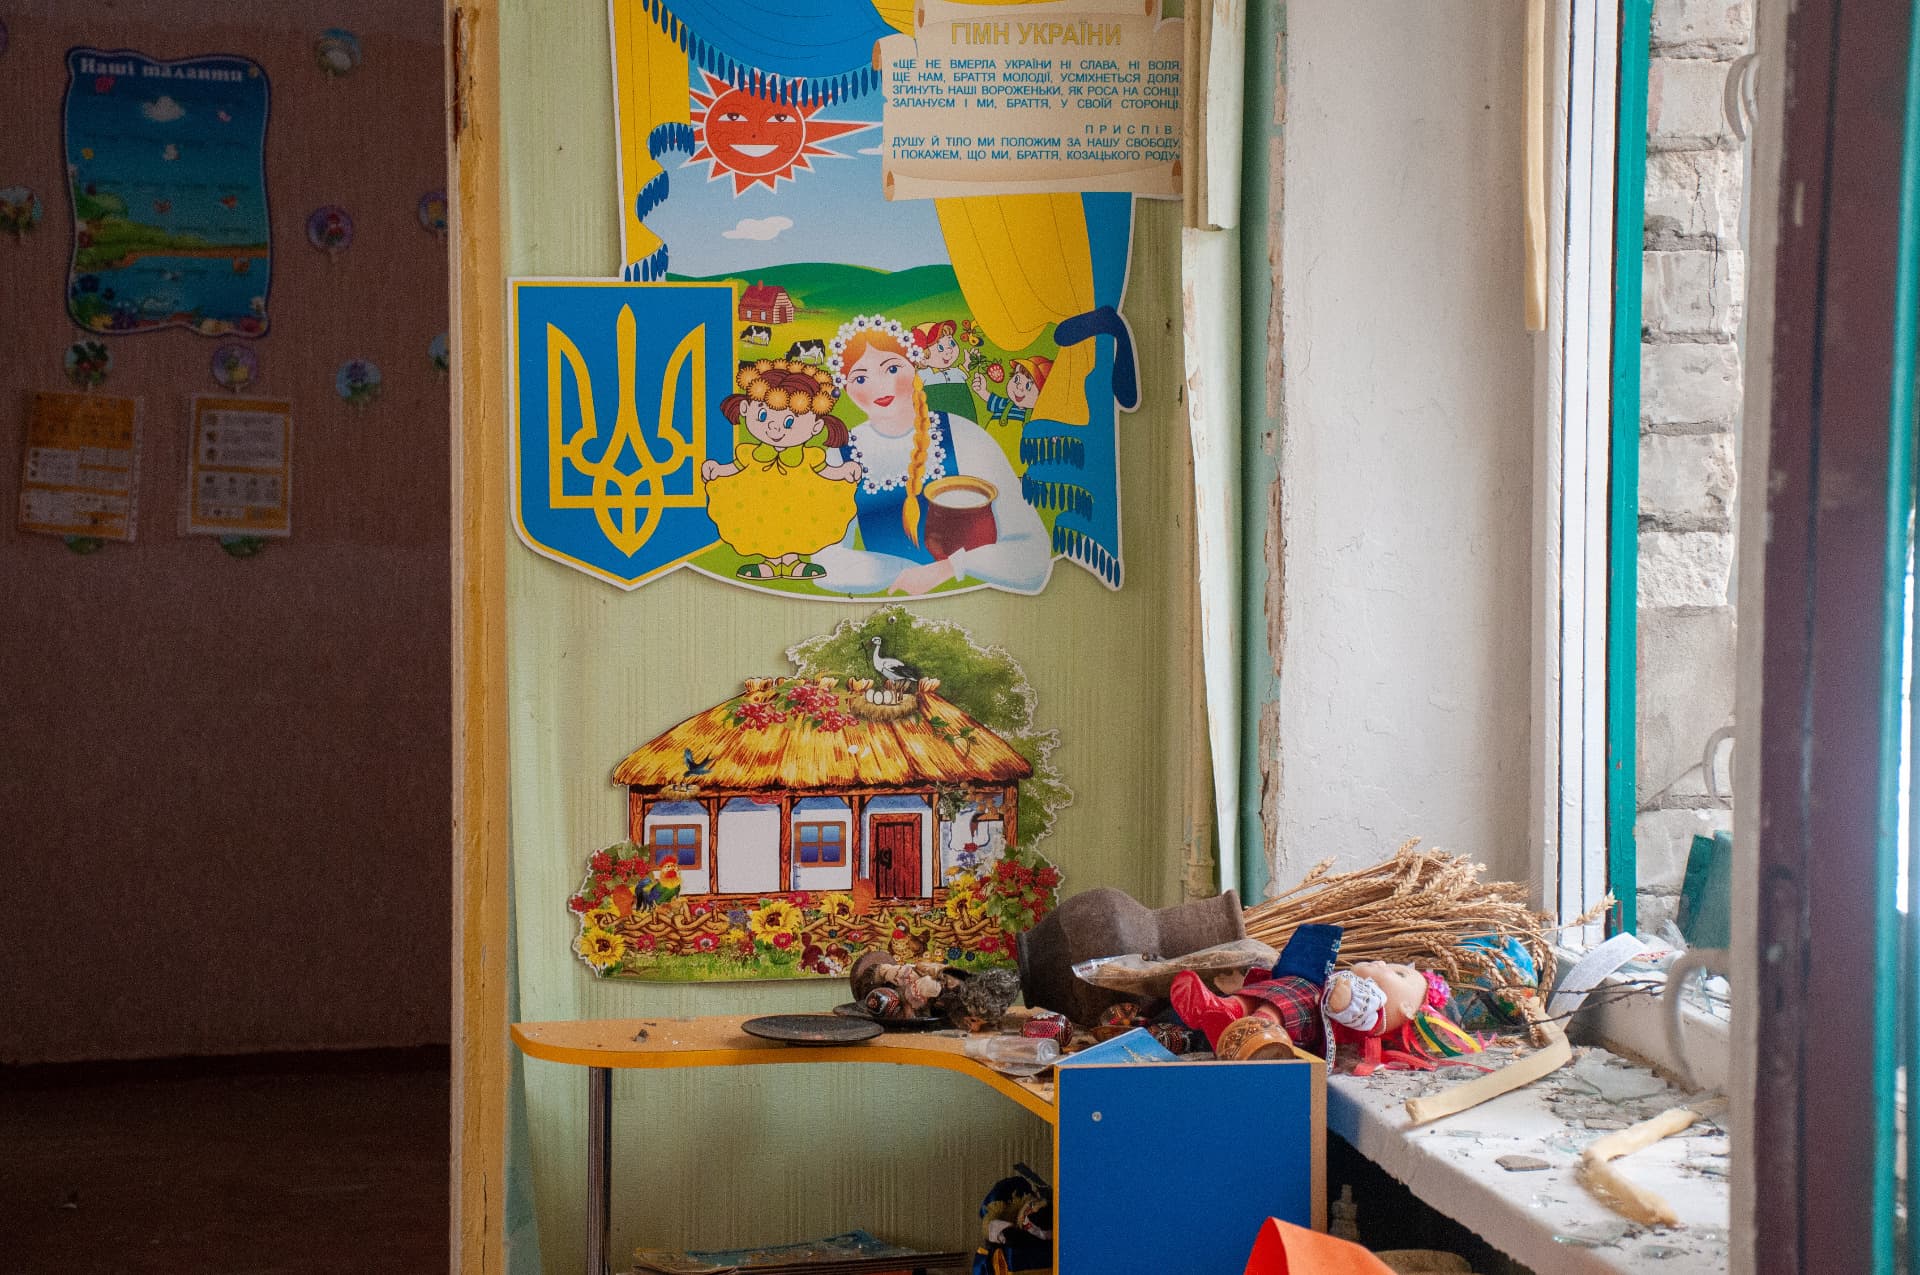 Destroyed kindergarten, as a result of explosions and shelling by the Russian occupying military, in Kharkiv